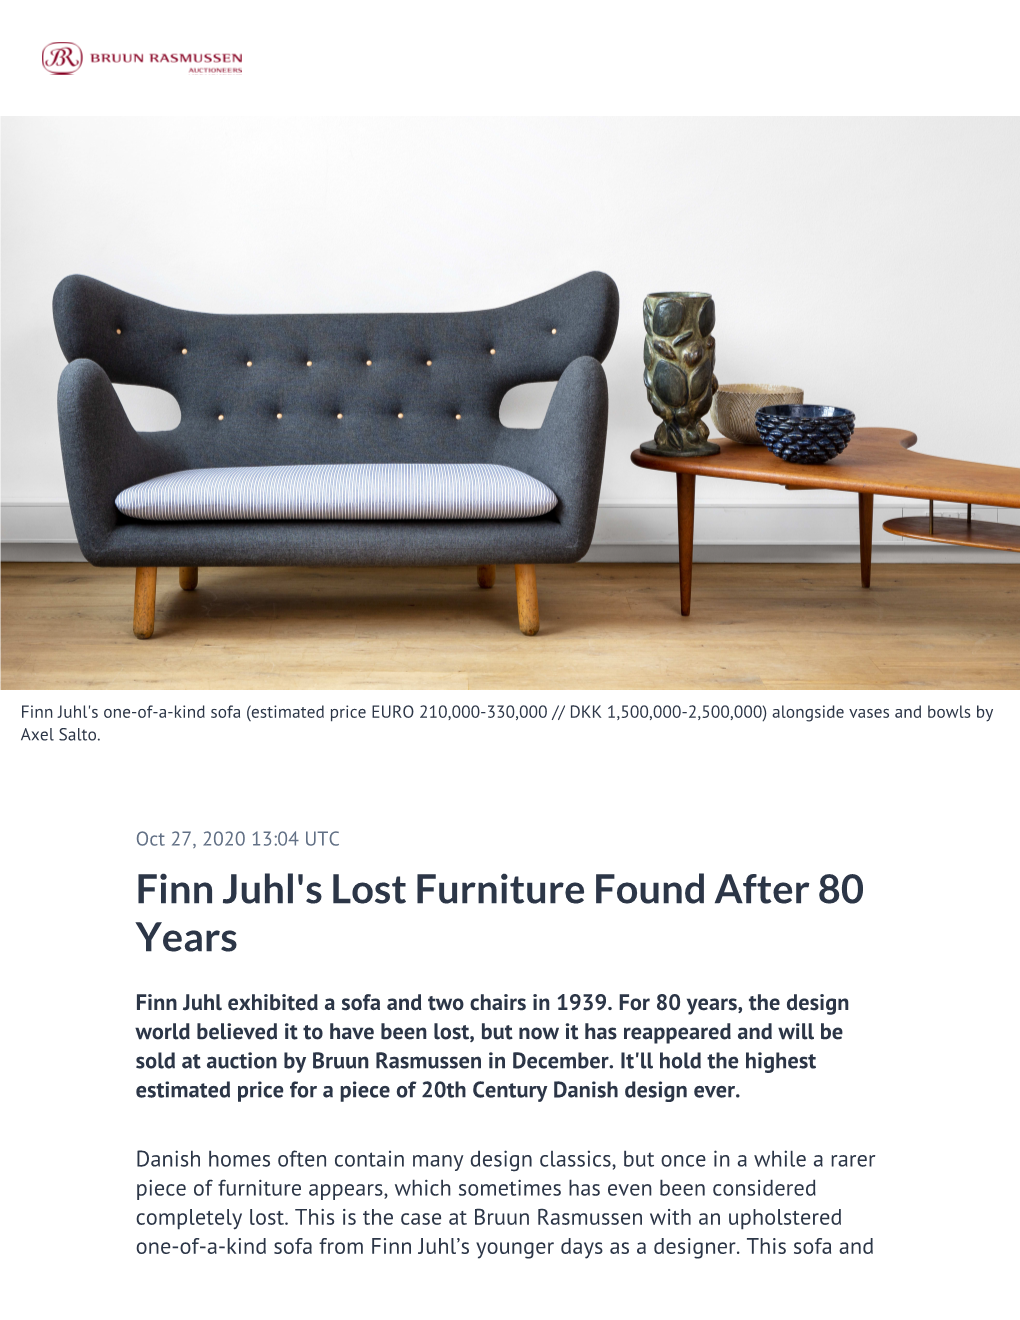 Finn Juhl's Lost Furniture Found After 80 Years